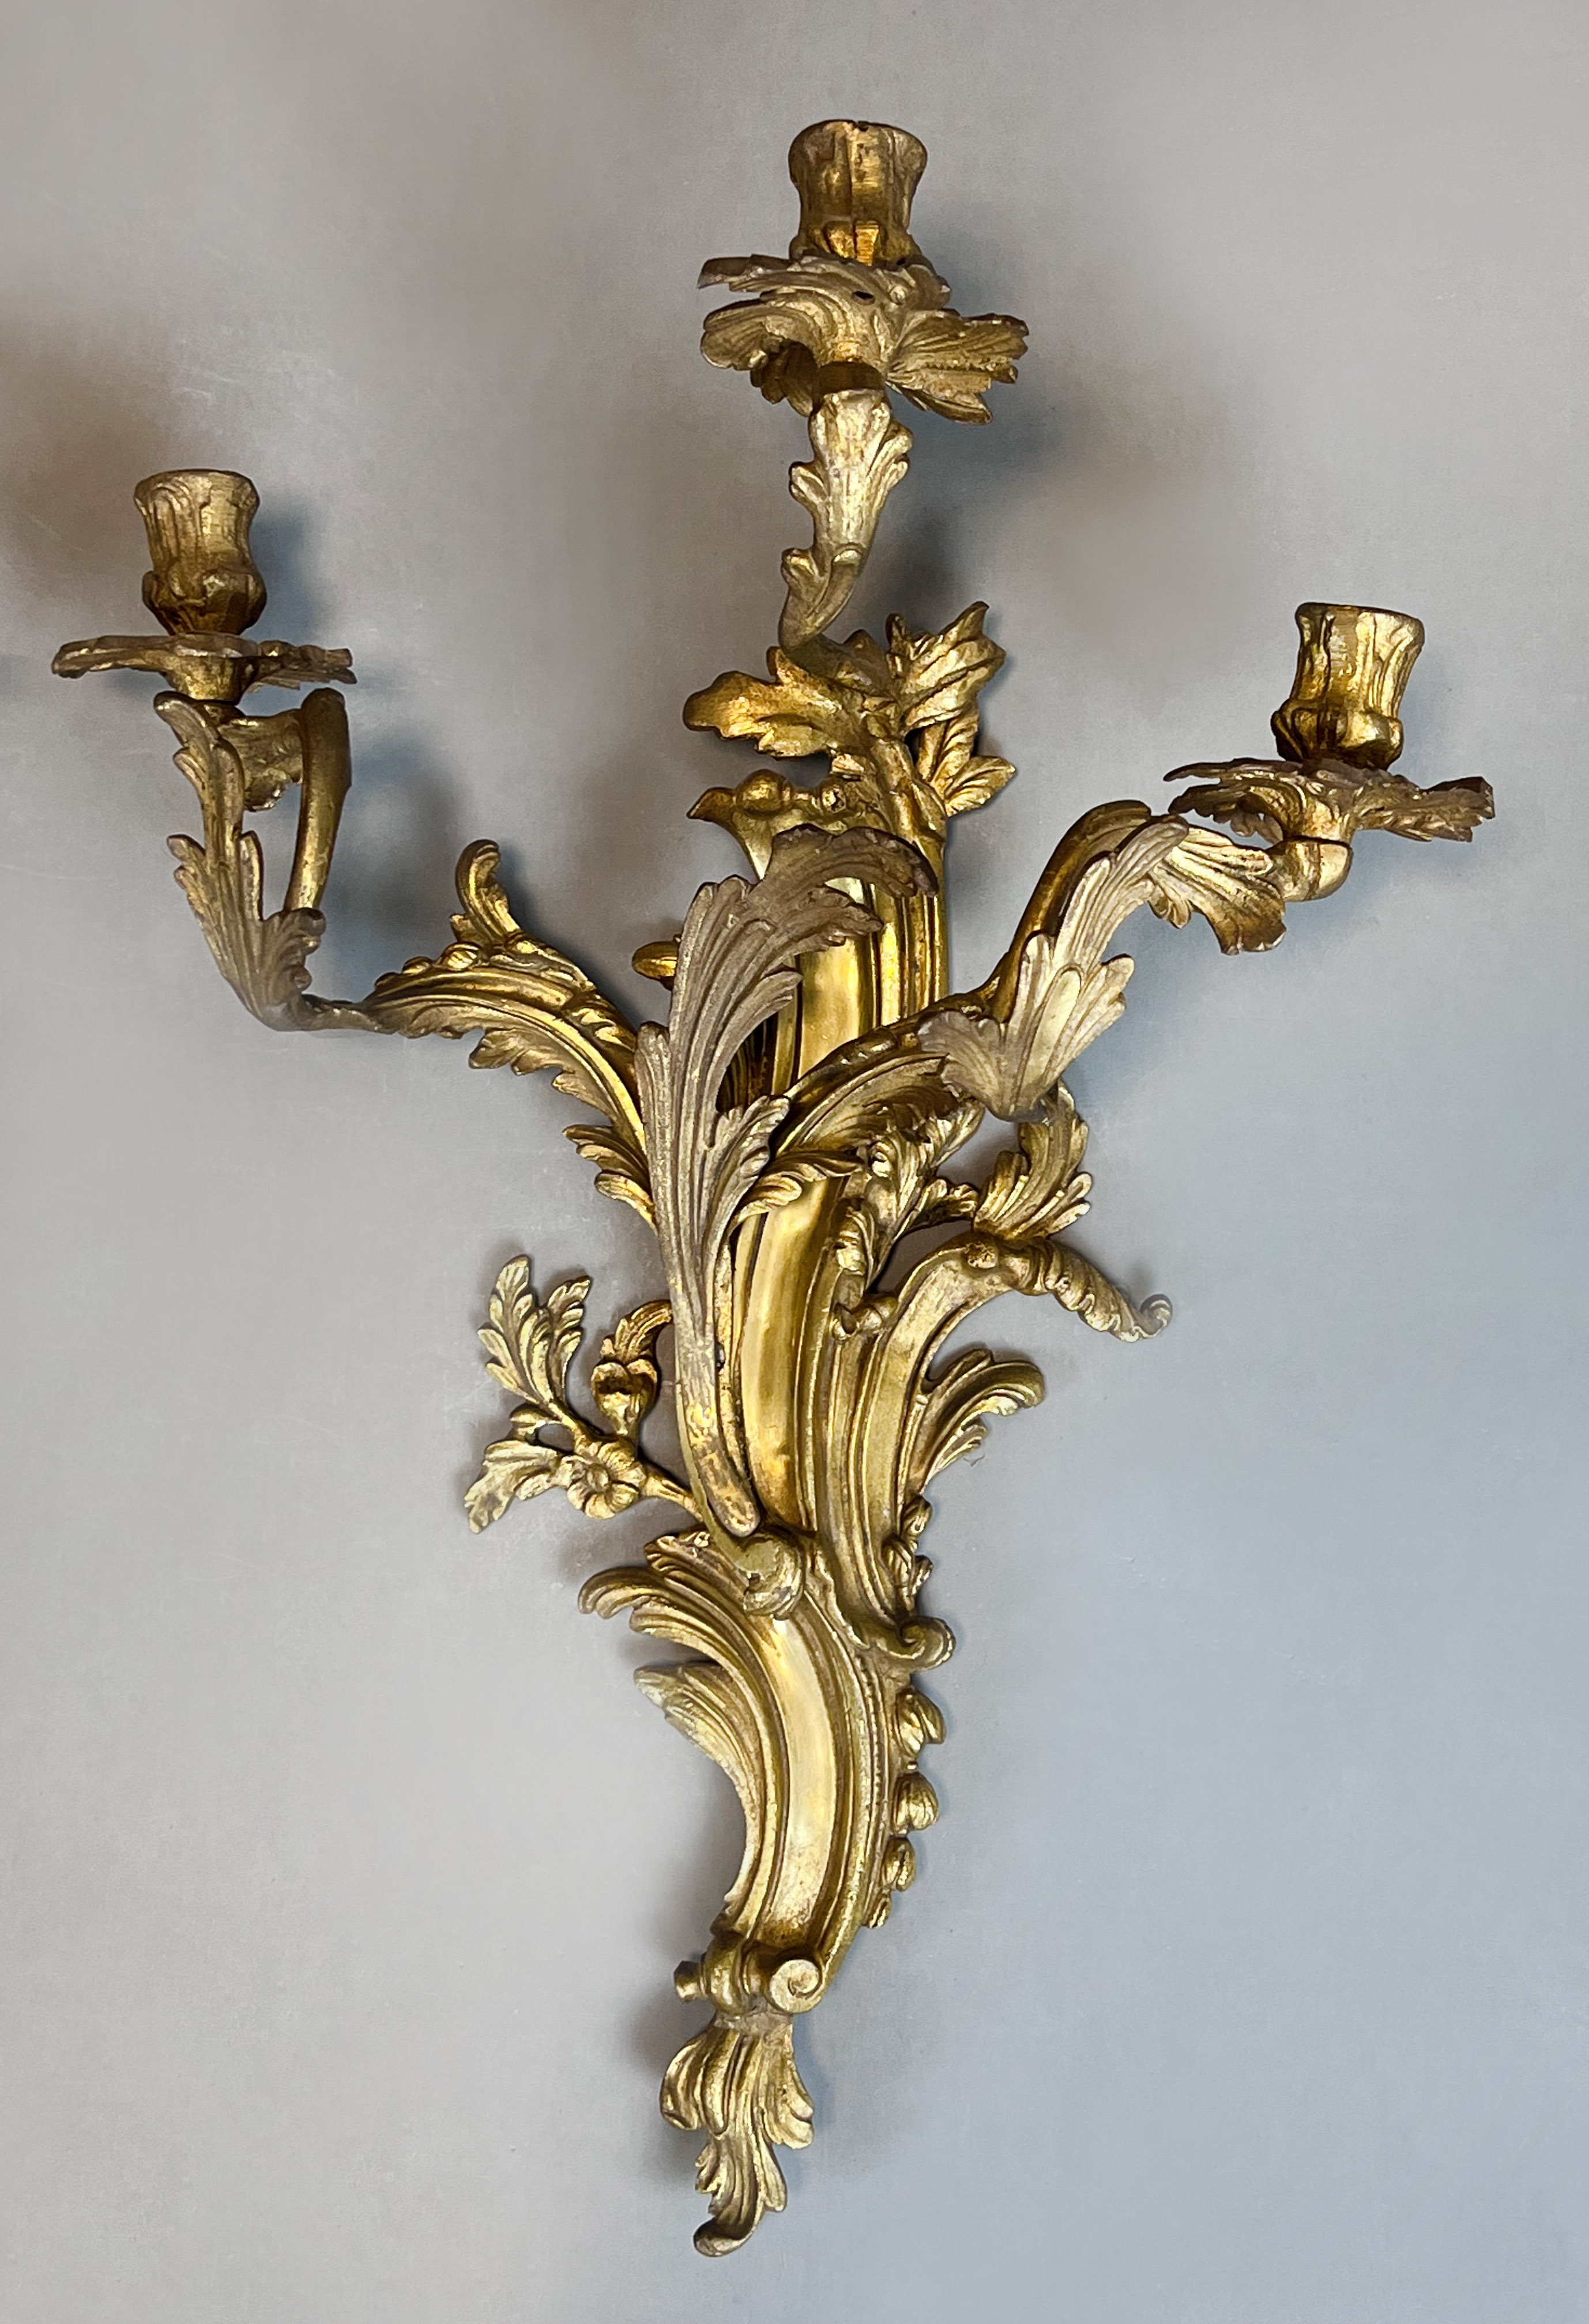 Pair of antique wall candlesticks. Gilt bronze. 19th century. - Image 5 of 11